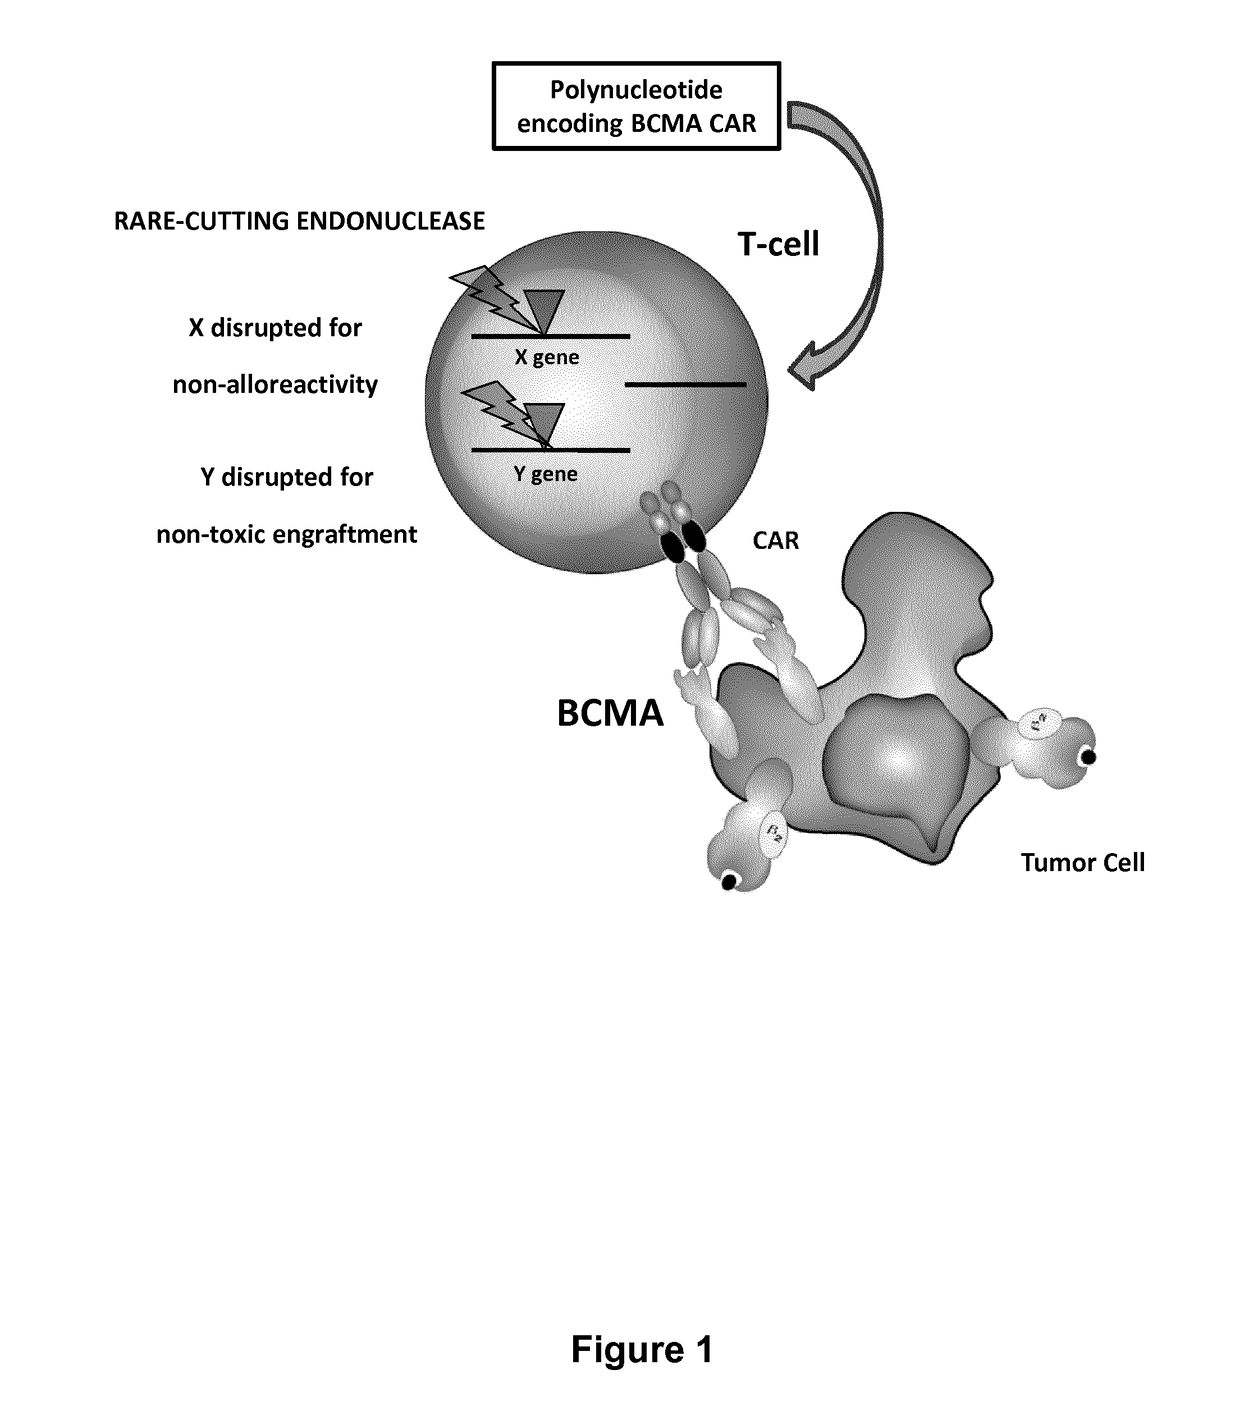 Bcma (CD269) specific chimeric antigen receptors for cancer immunotherapy